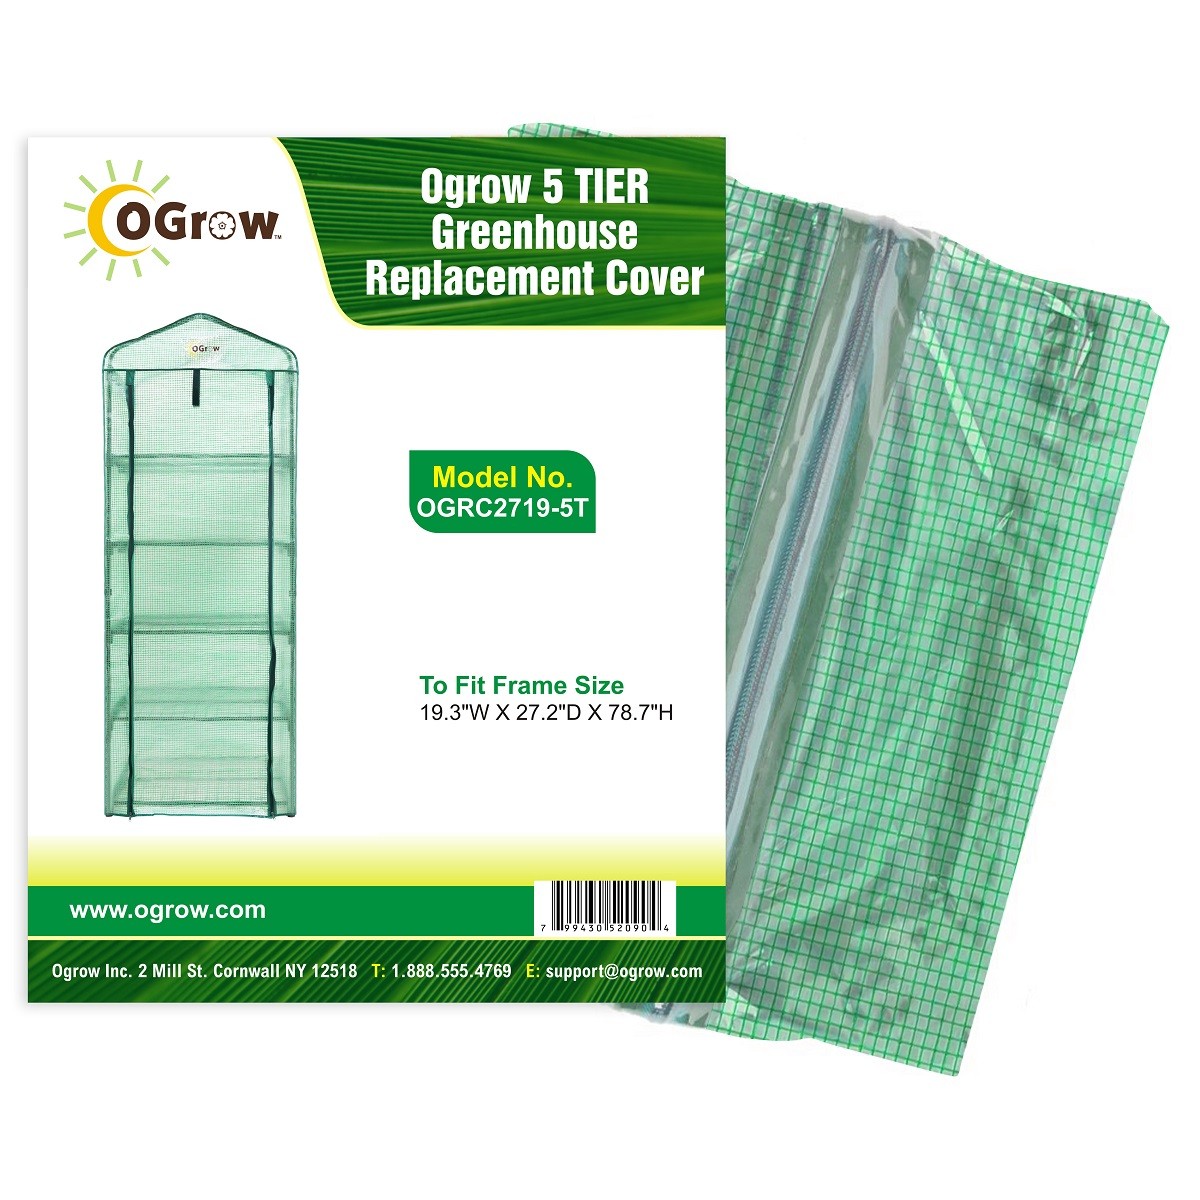 5 Tier Mini Polyethylene Plastic Greenhouse Replacement Cover - 27" W x 19" D x 79" H - Green